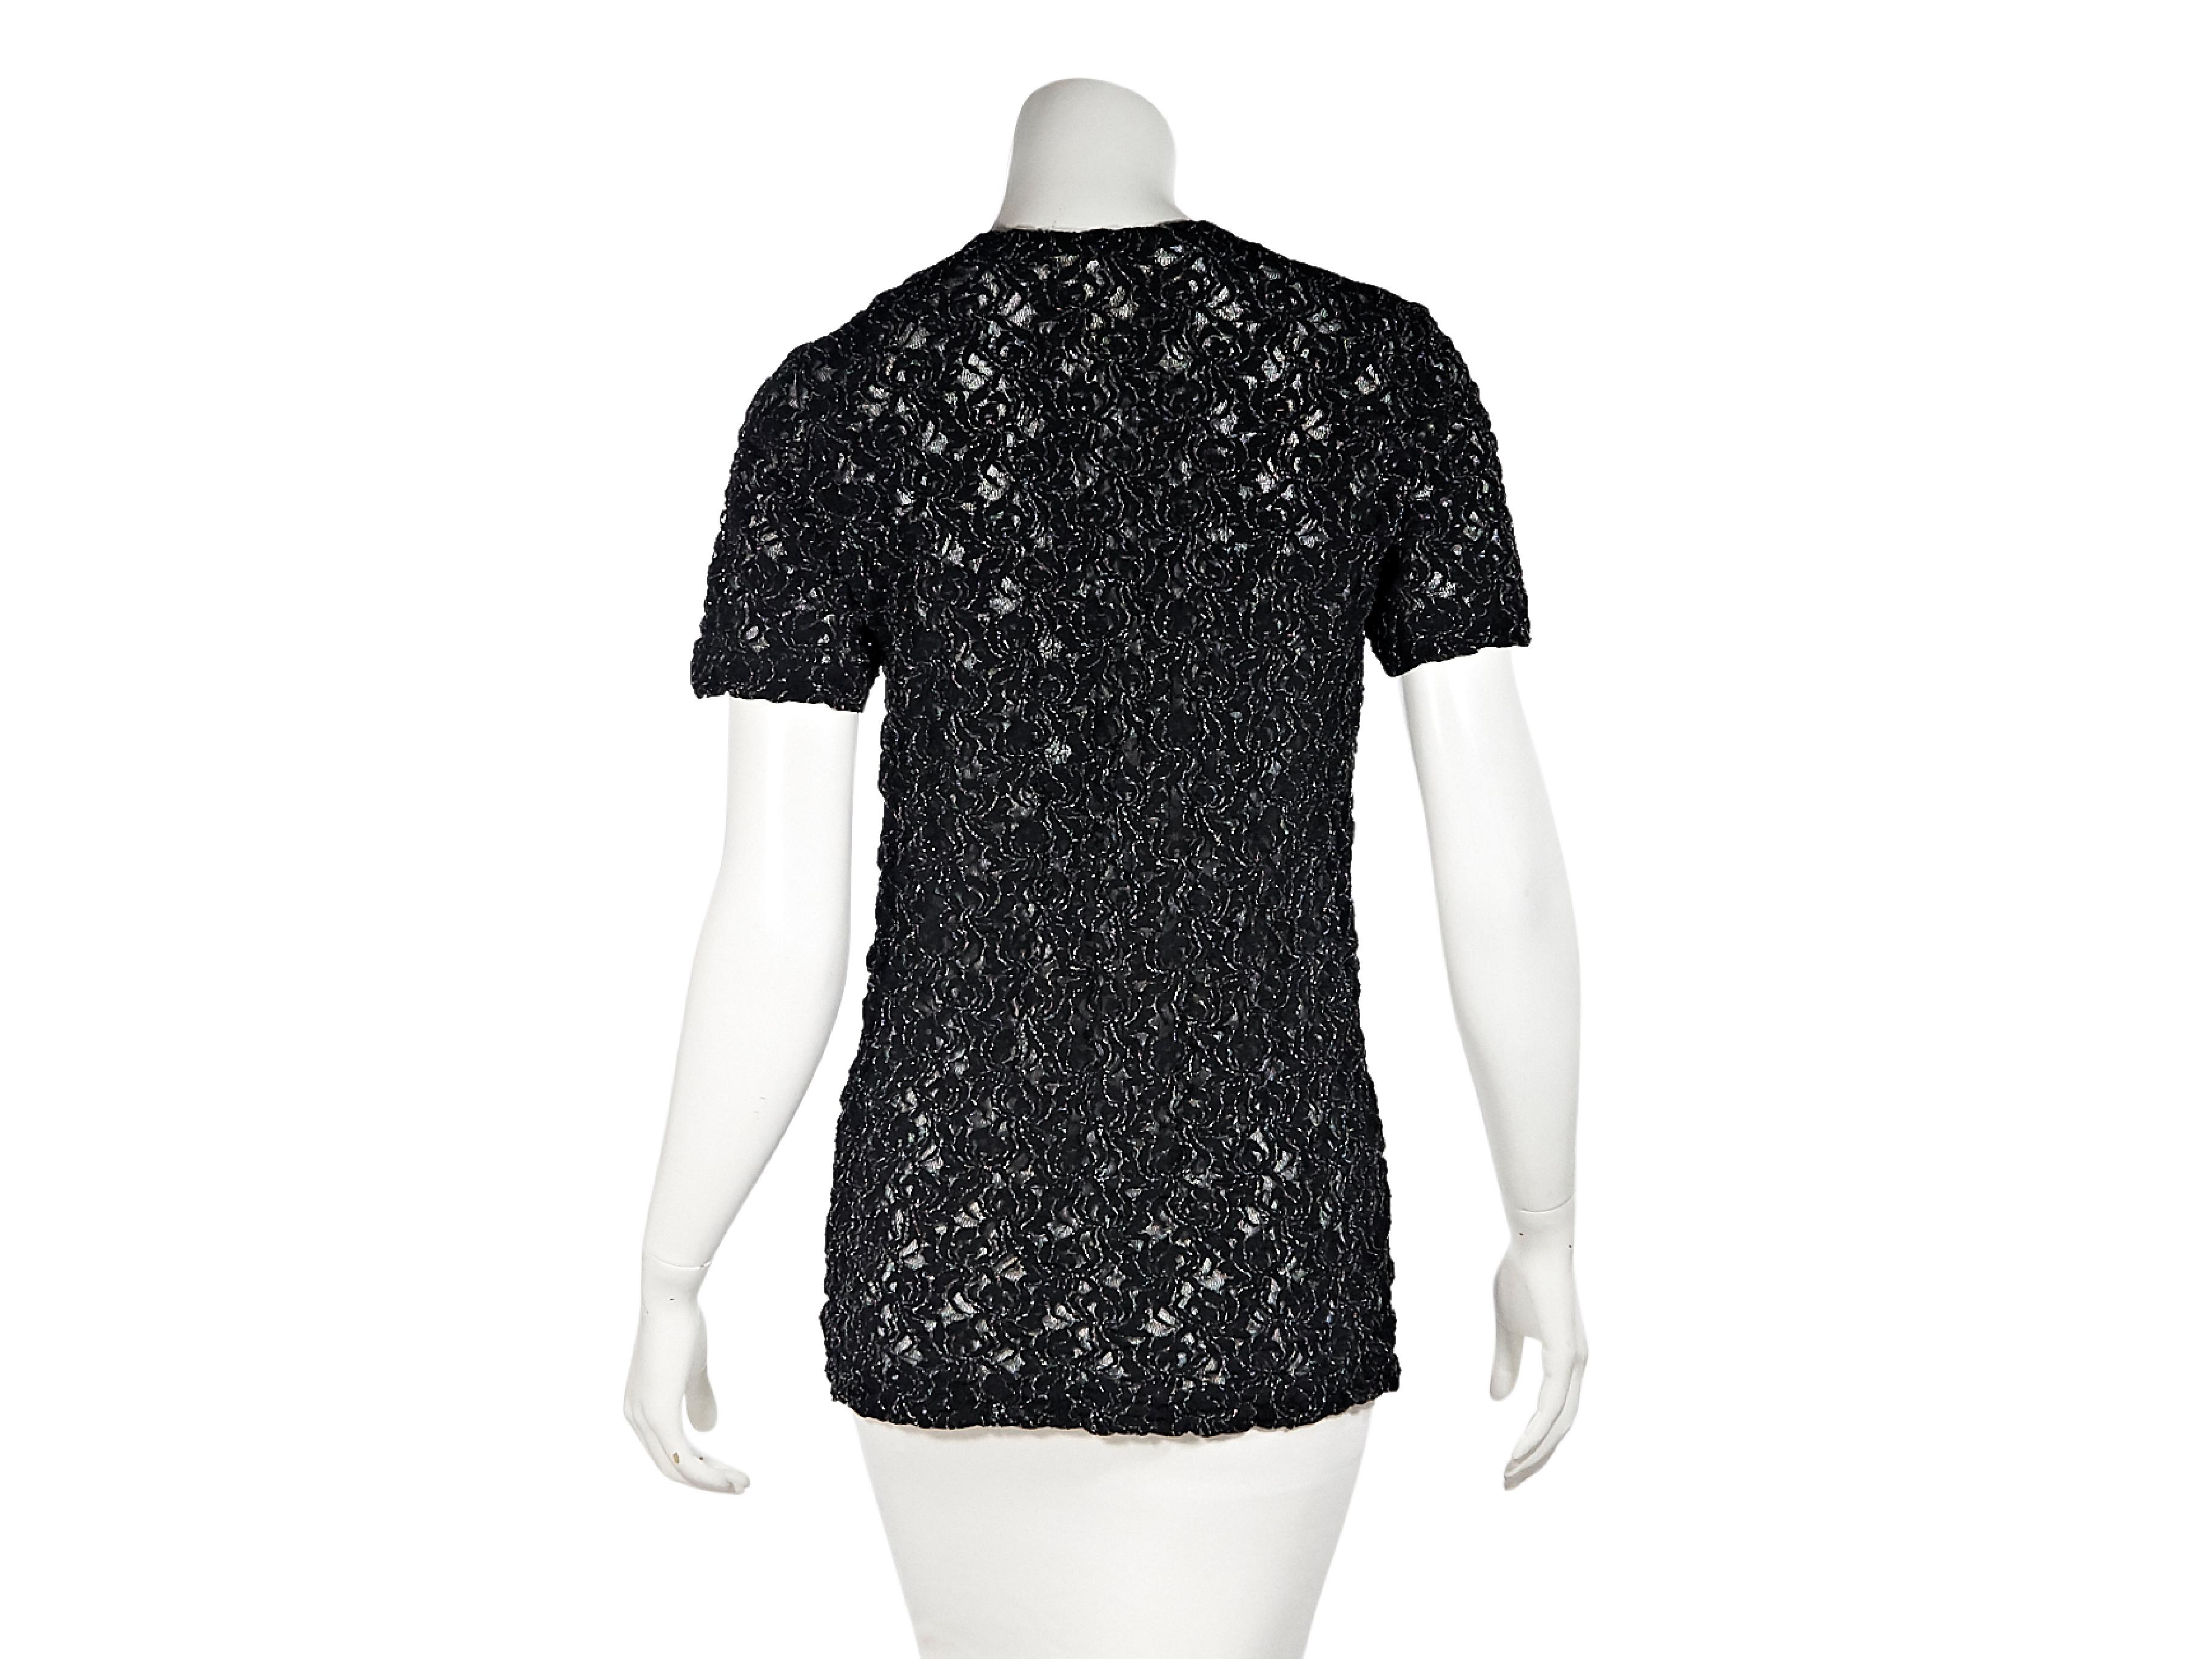 Product details:  Vintage black lace-like top by Comme des Garcons.  Jewelneck.  Short sleeves.  Pullover style.  34